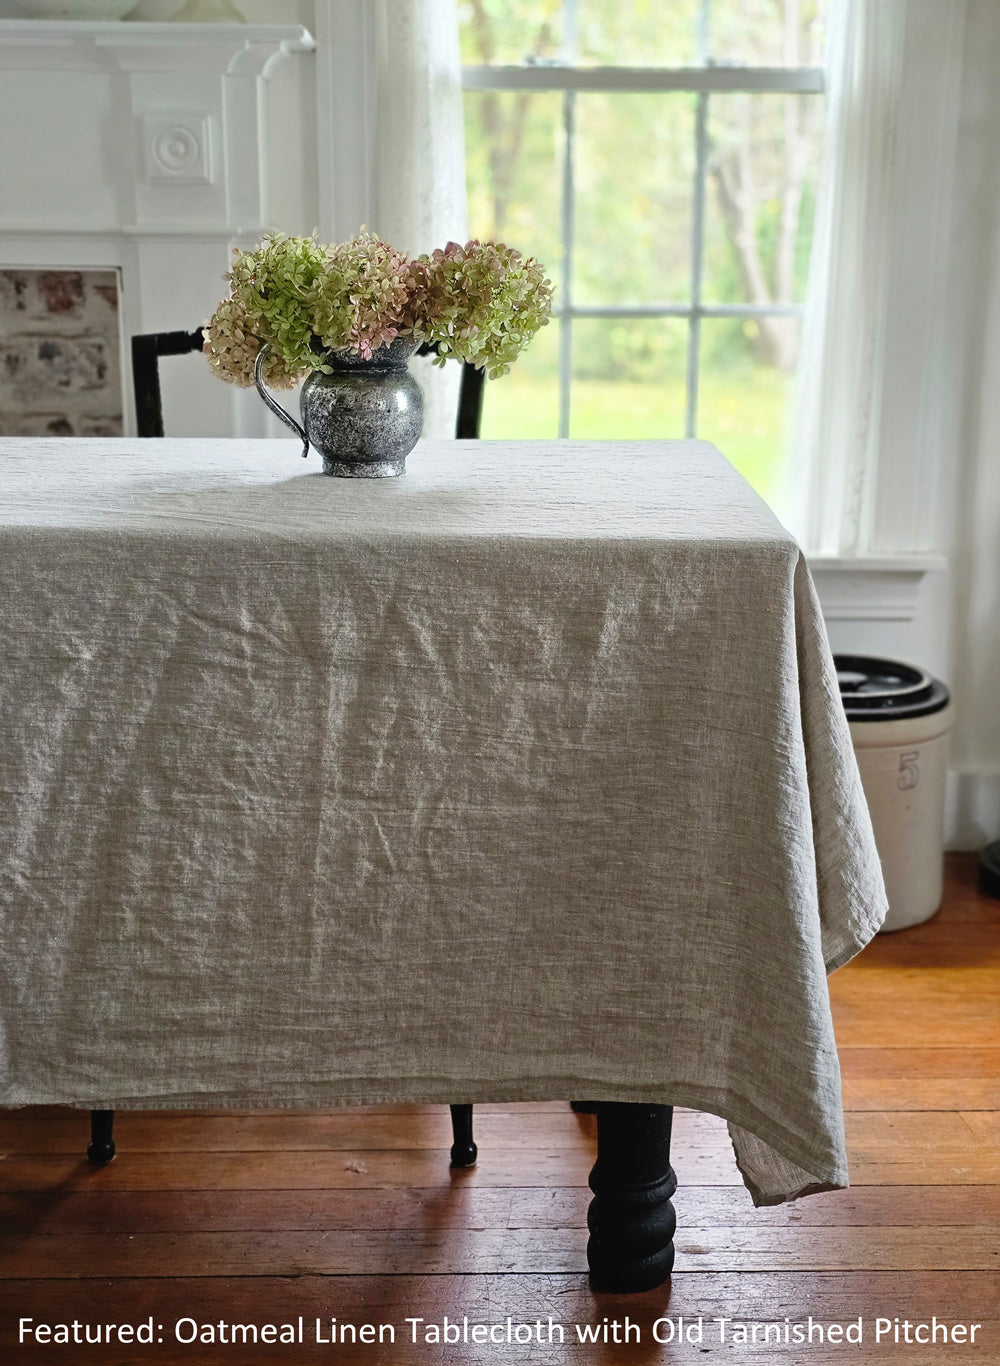 https://cdn.shopify.com/s/files/1/2101/2541/files/Oatmeal-Linen-Tablecloth-with-Old-Tarnished-Pitcher-TXT_a04cb727-37f8-4310-861a-8713a69bdfd2_5000x.jpg?v=1698241565